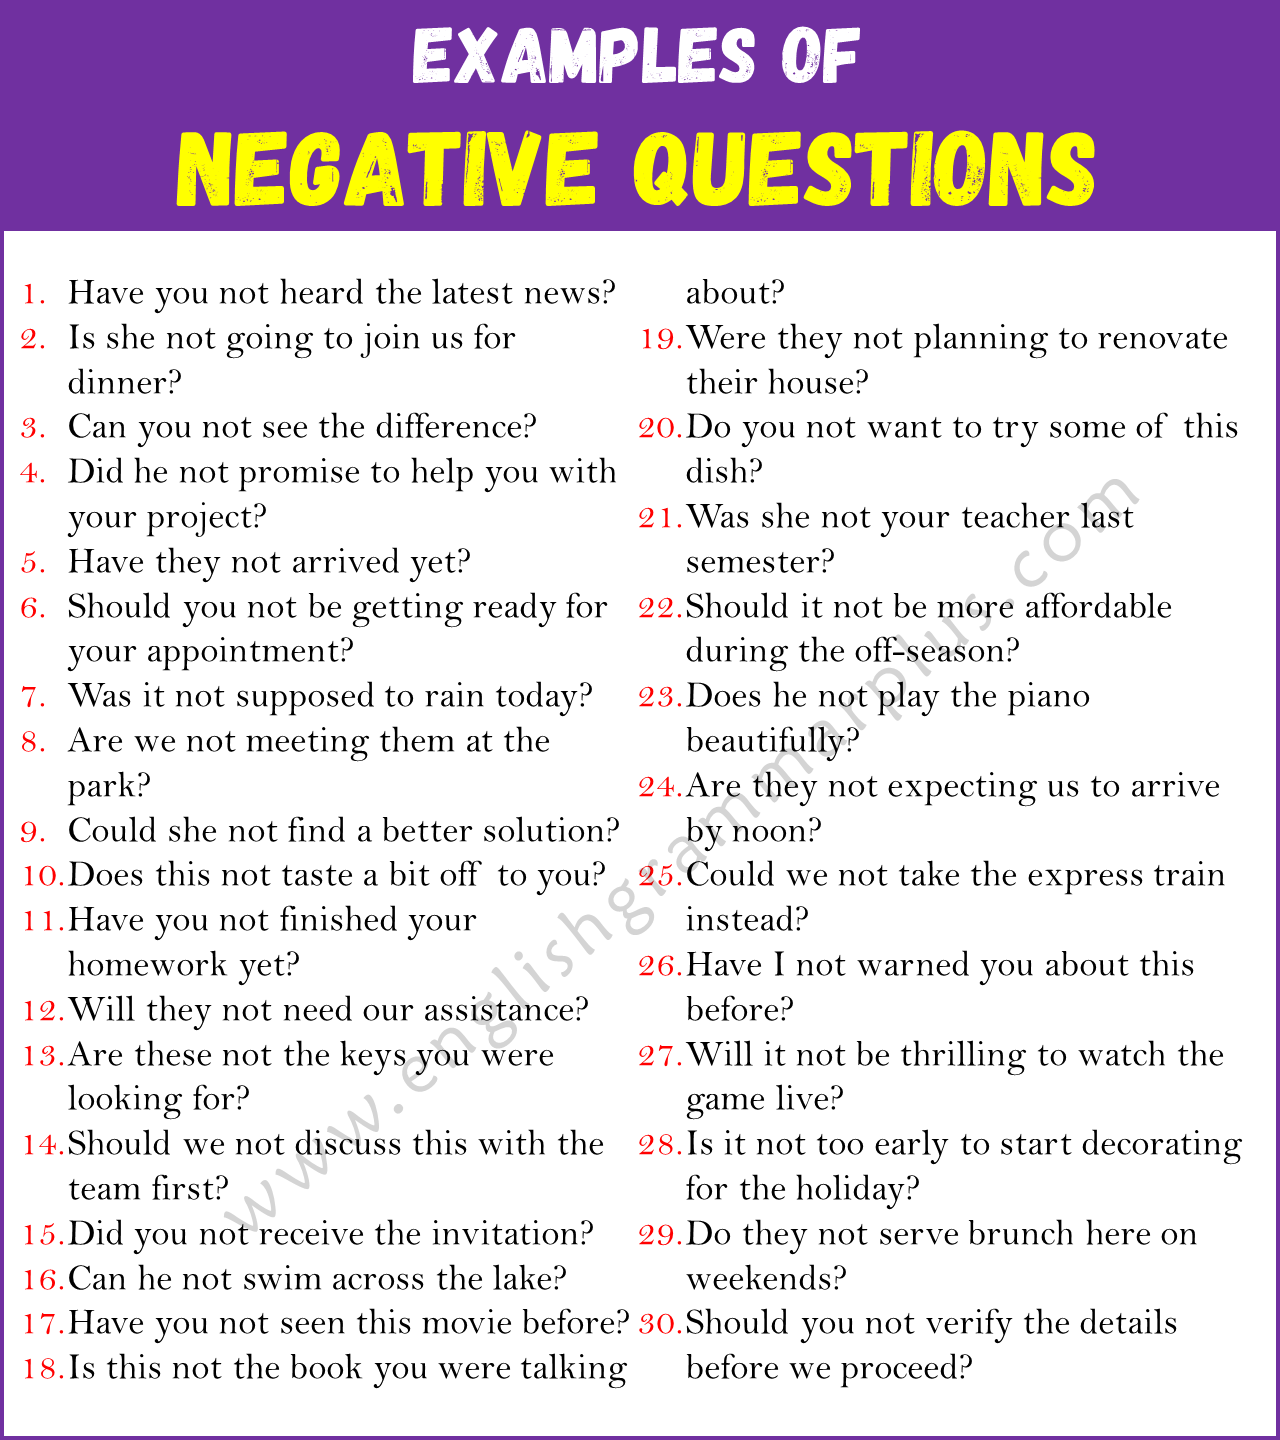 Examples of Negative Questions in English